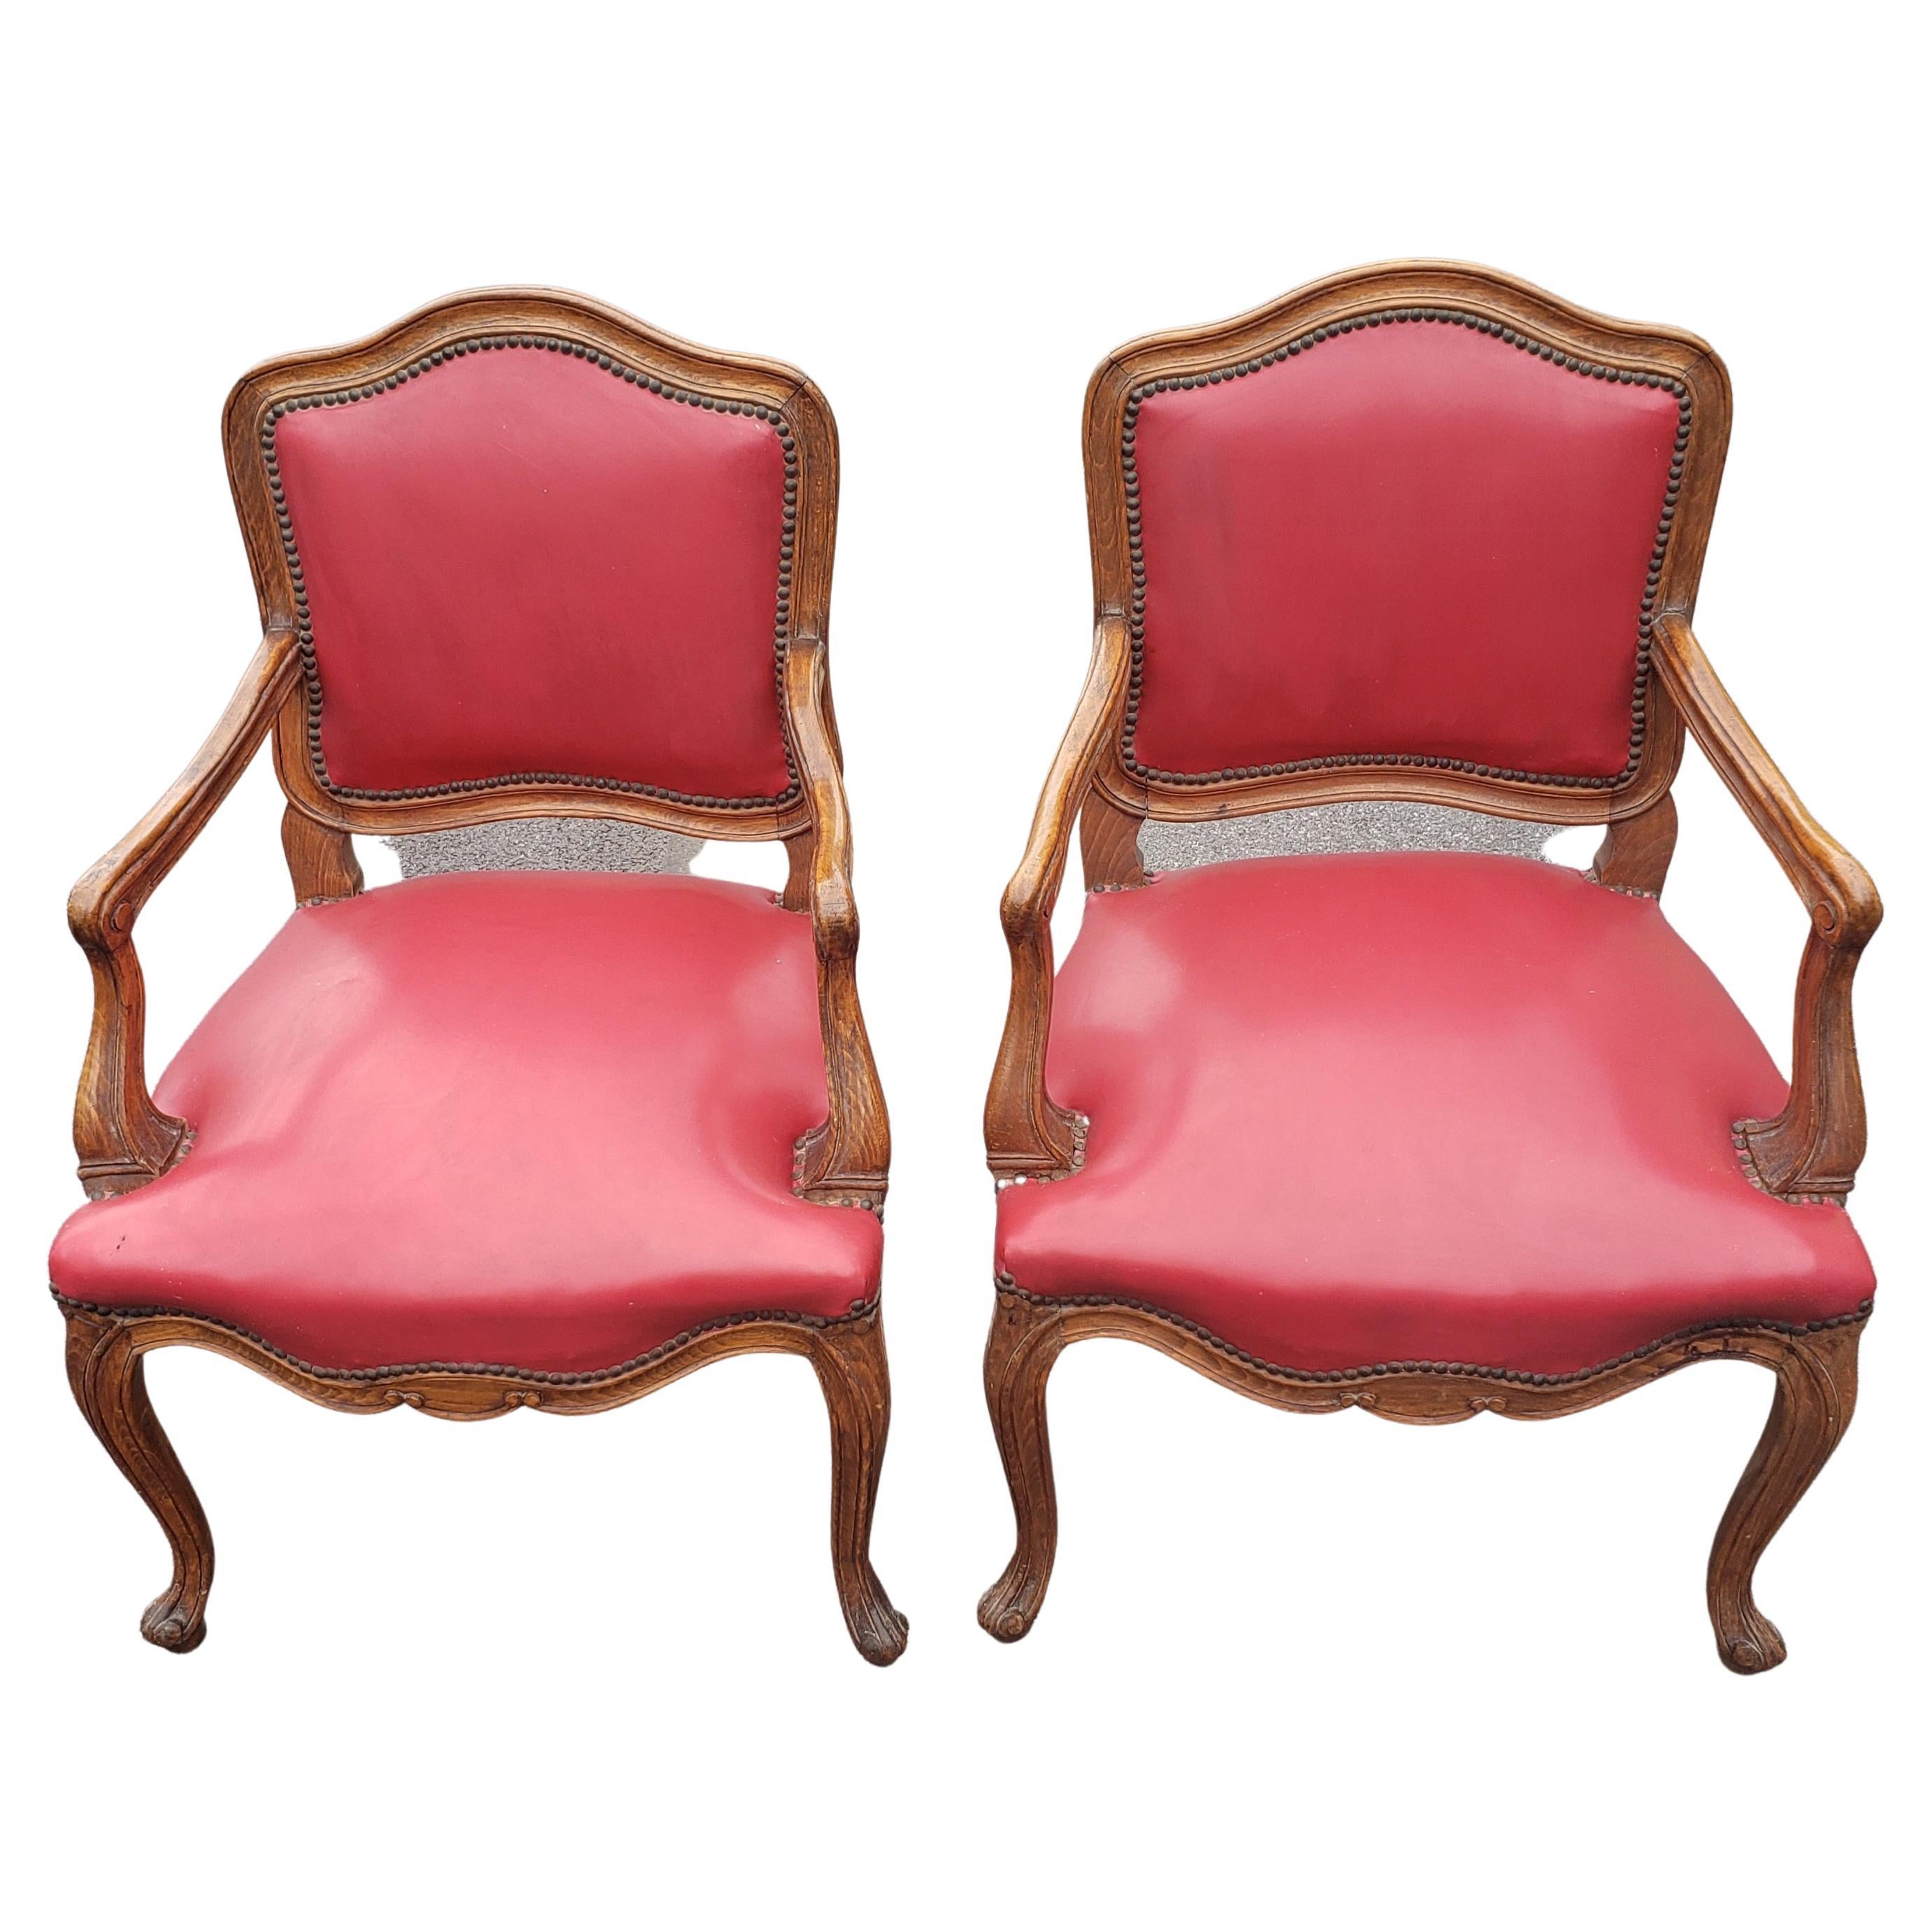 Pair of Louis XV style red leather upholstered oak fauteuils. Very good vintage condition. Webbed seat support in very good condition. Very comfortable
Measure 24.5